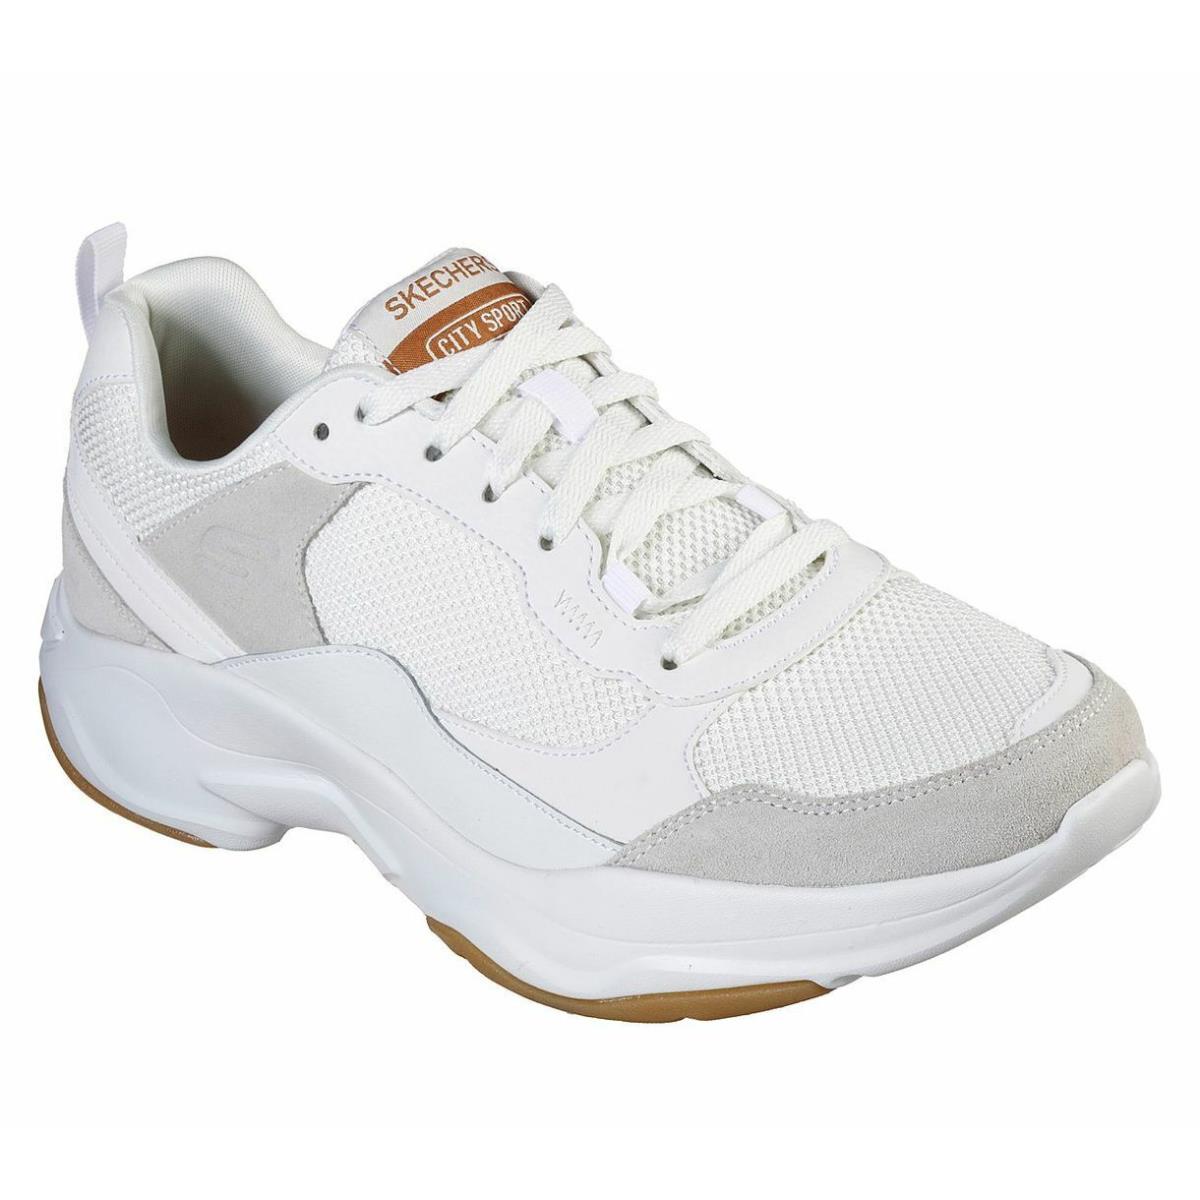 Skechers 51959 Men`s Shoes City Sport Shoe Soft White Suede Smooth Leather Off White